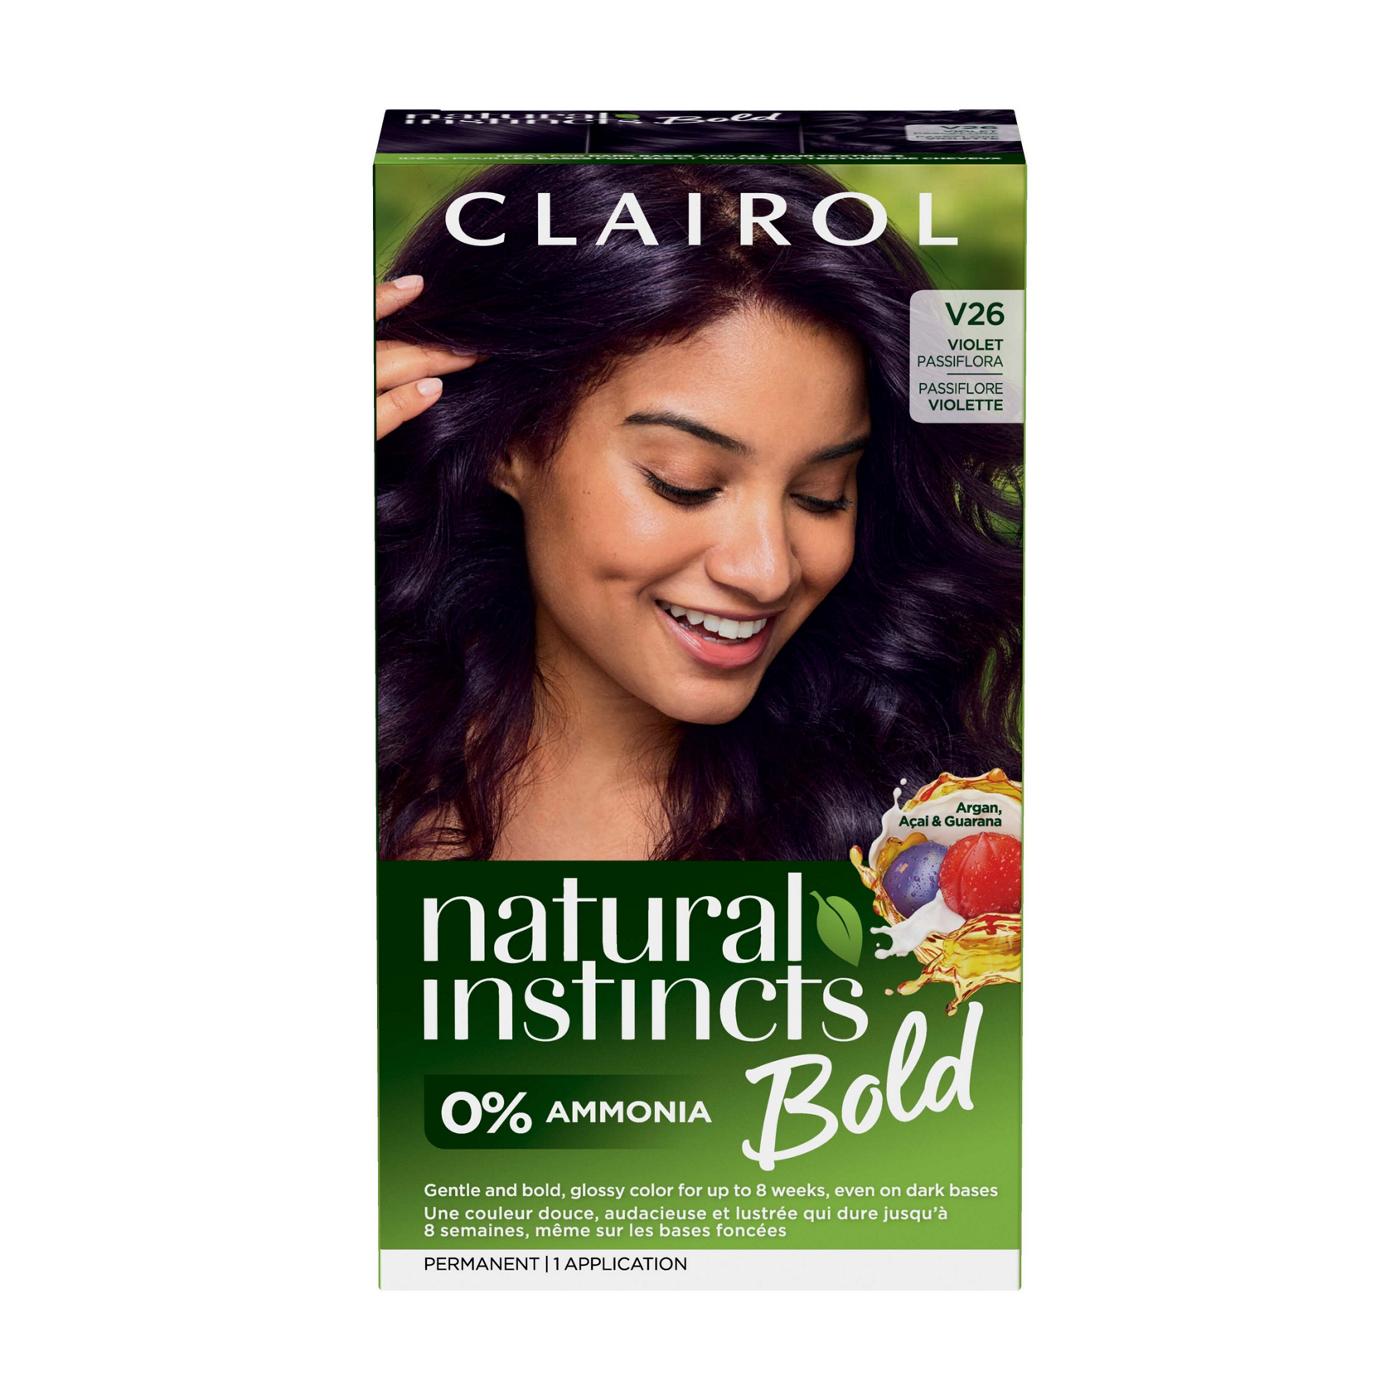 Clairol Natural Instincts Bold Permanent Hair Color -  V26 Violet Passiflora ; image 1 of 6